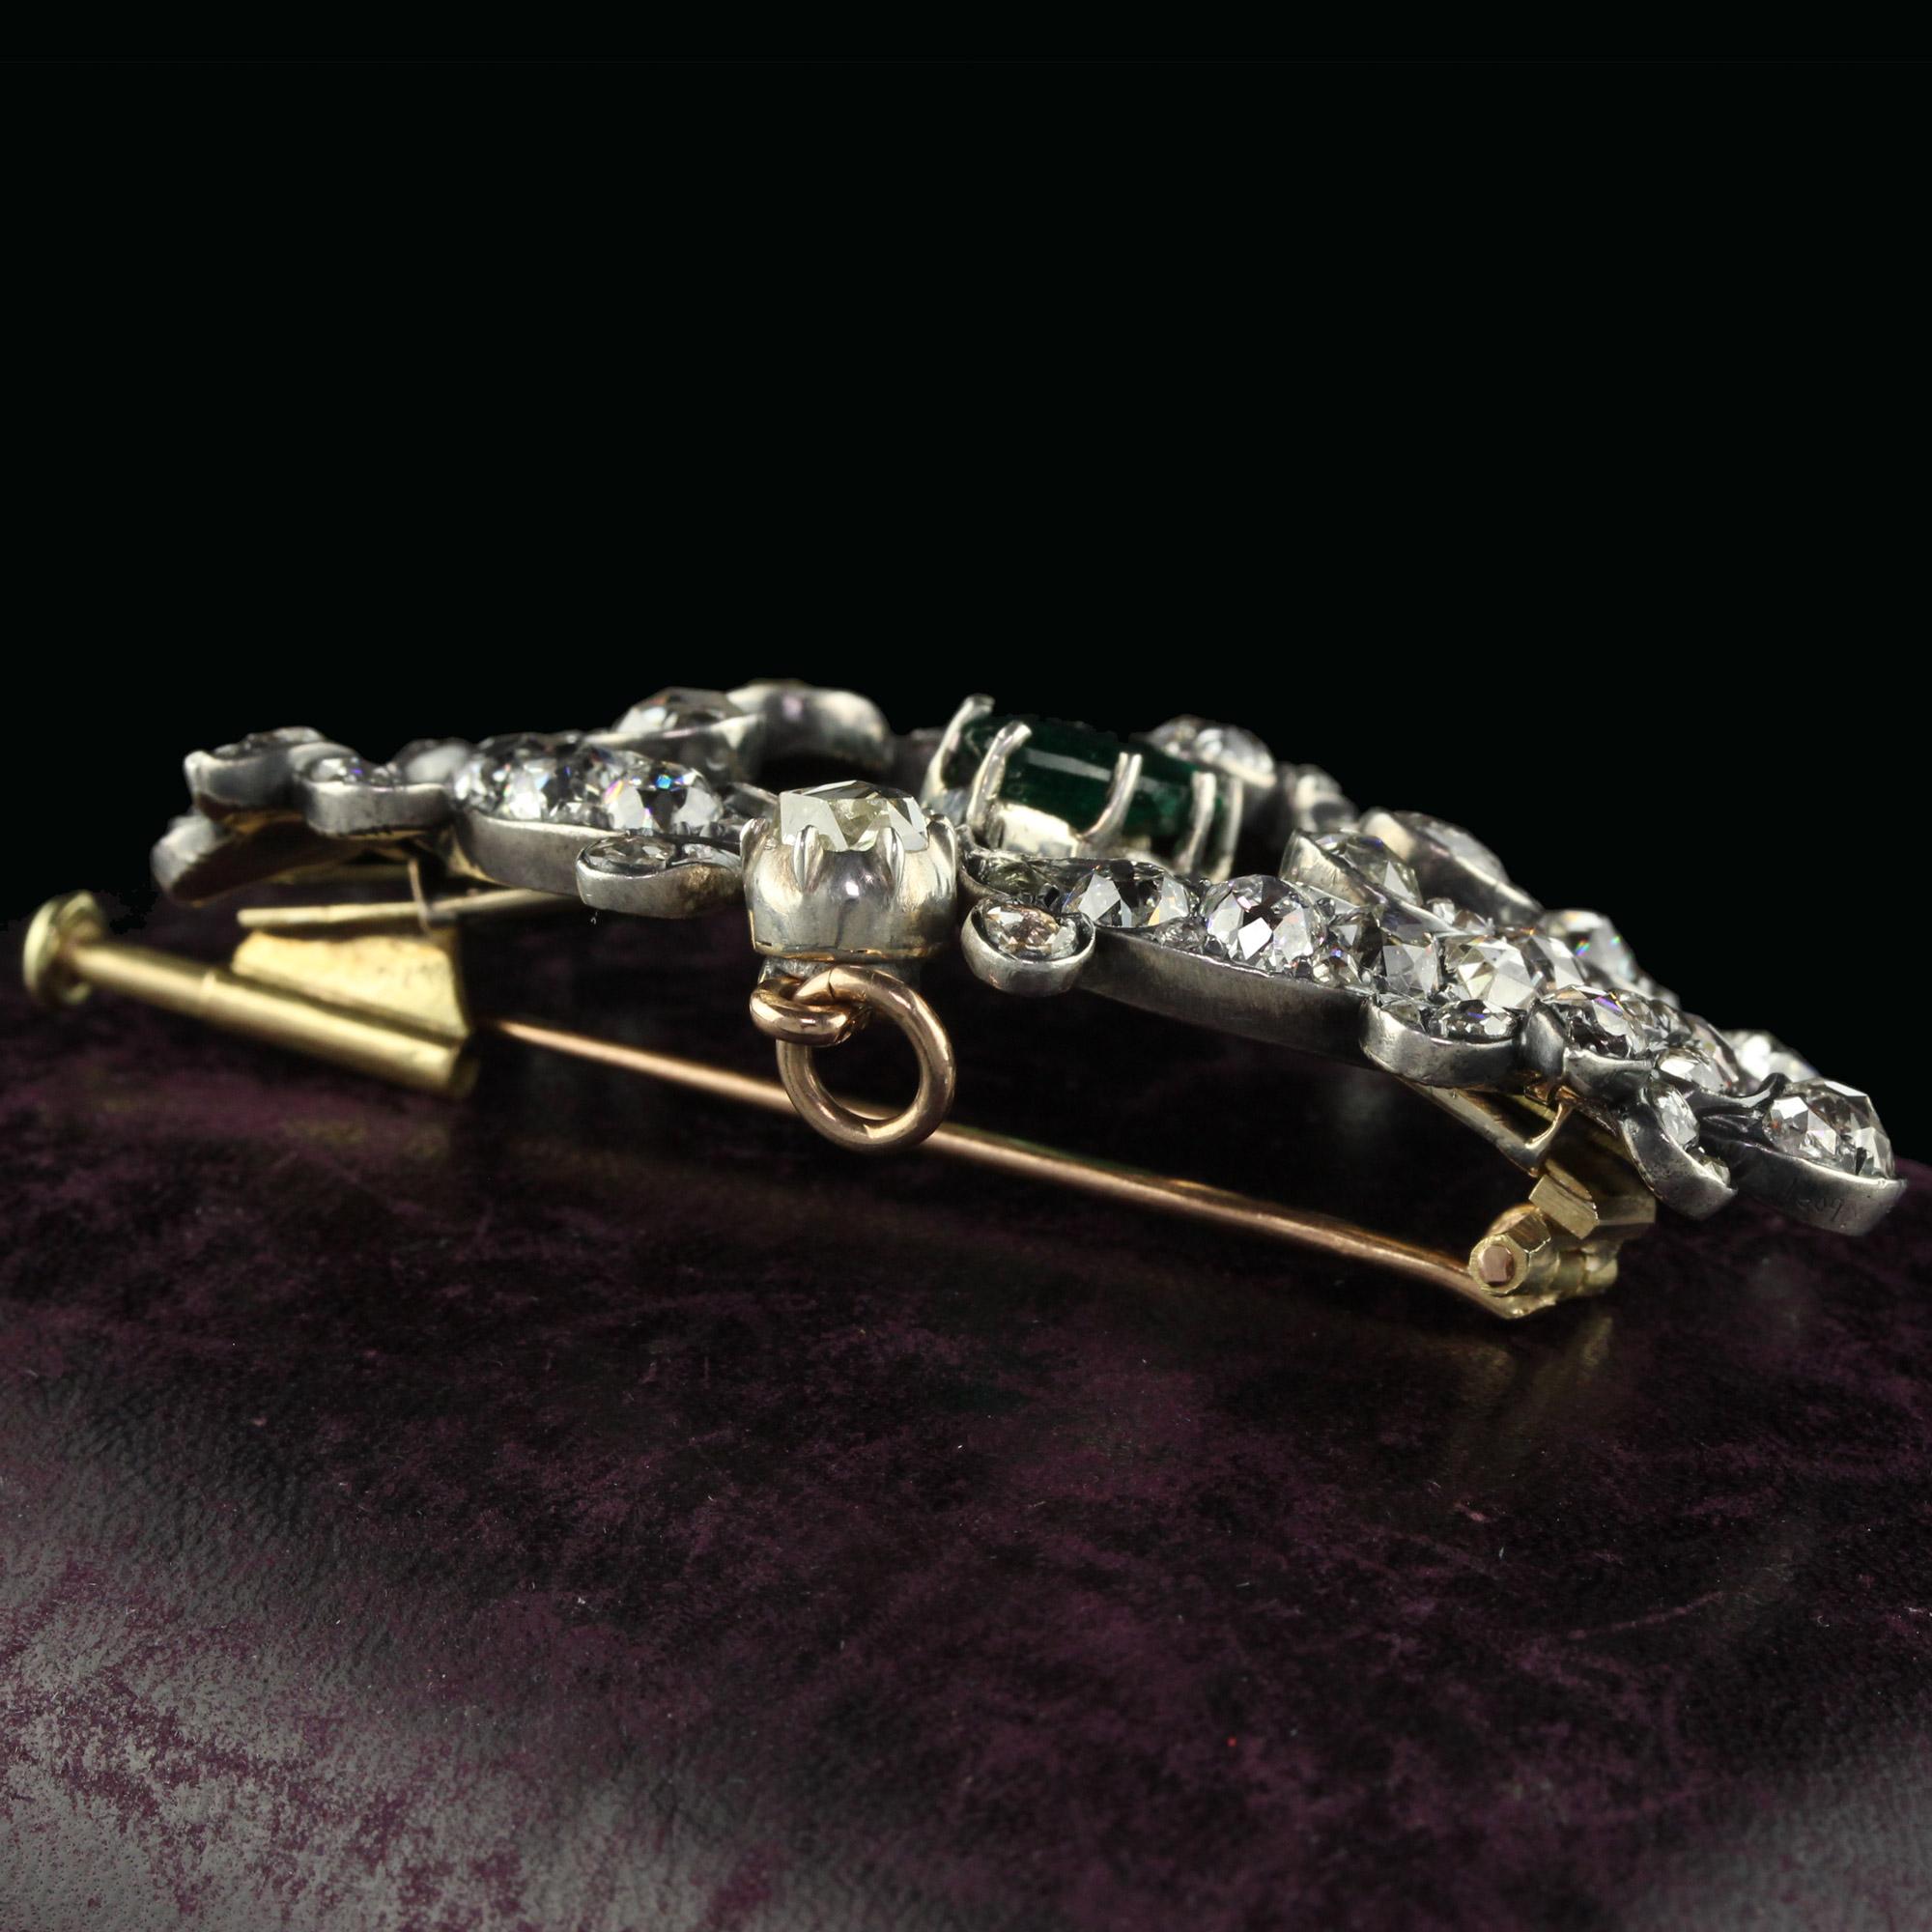 Women's or Men's Antique Victorian 18K Yellow Gold Silver Top Emerald and Diamond Pin Pendant